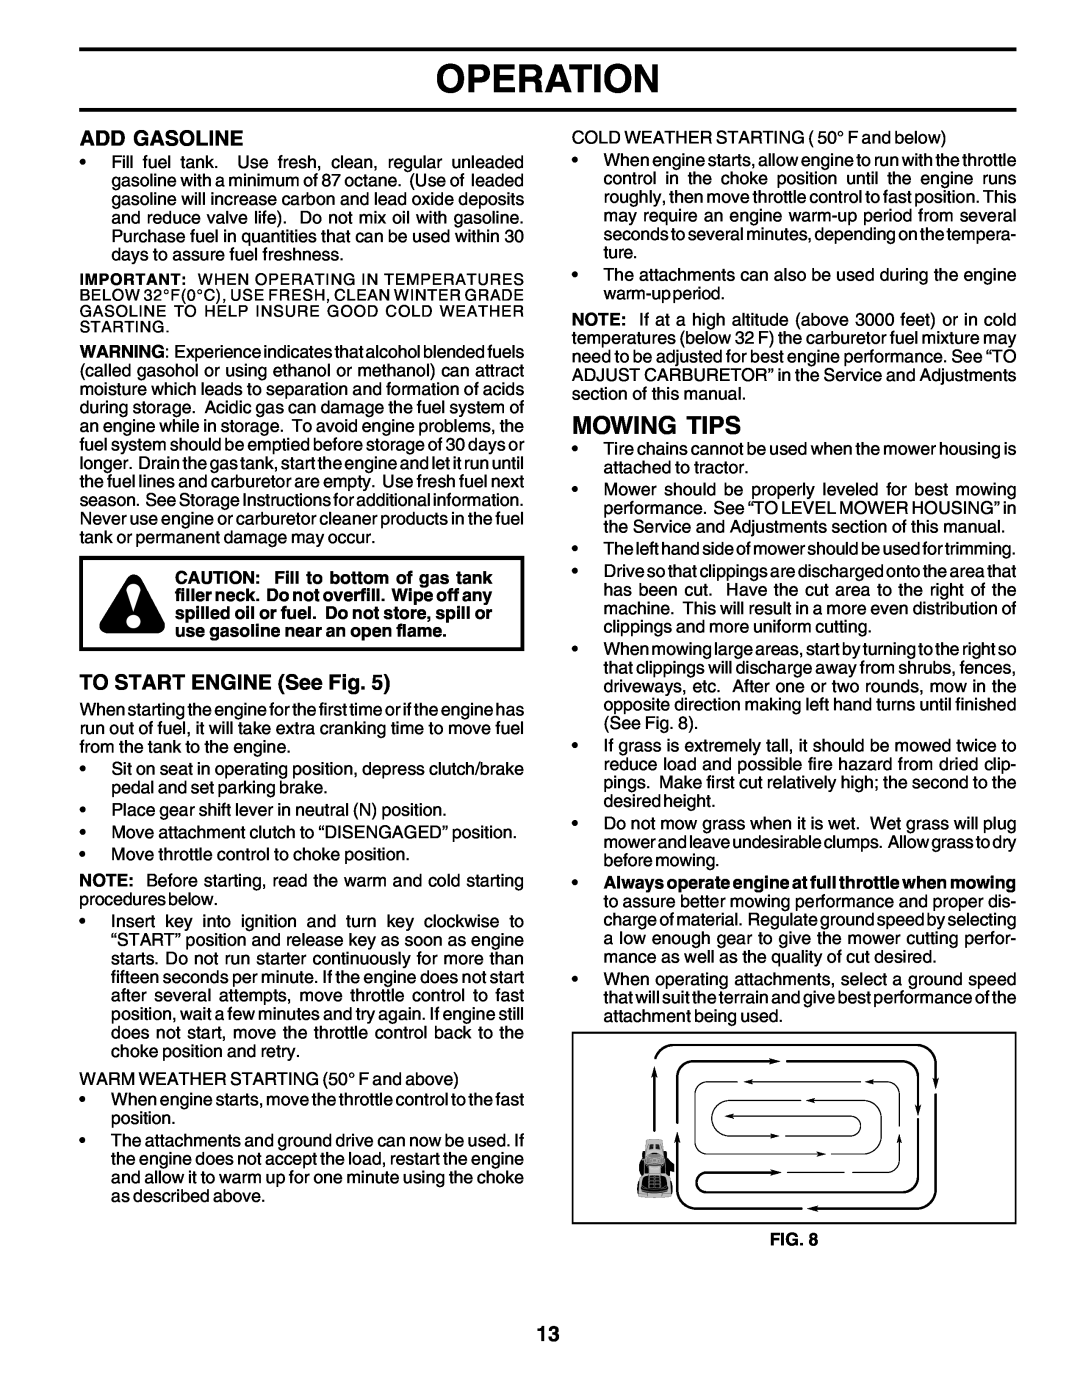 Poulan PO14542D manual Mowing Tips, Operation, Add Gasoline, TO START ENGINE See Fig 